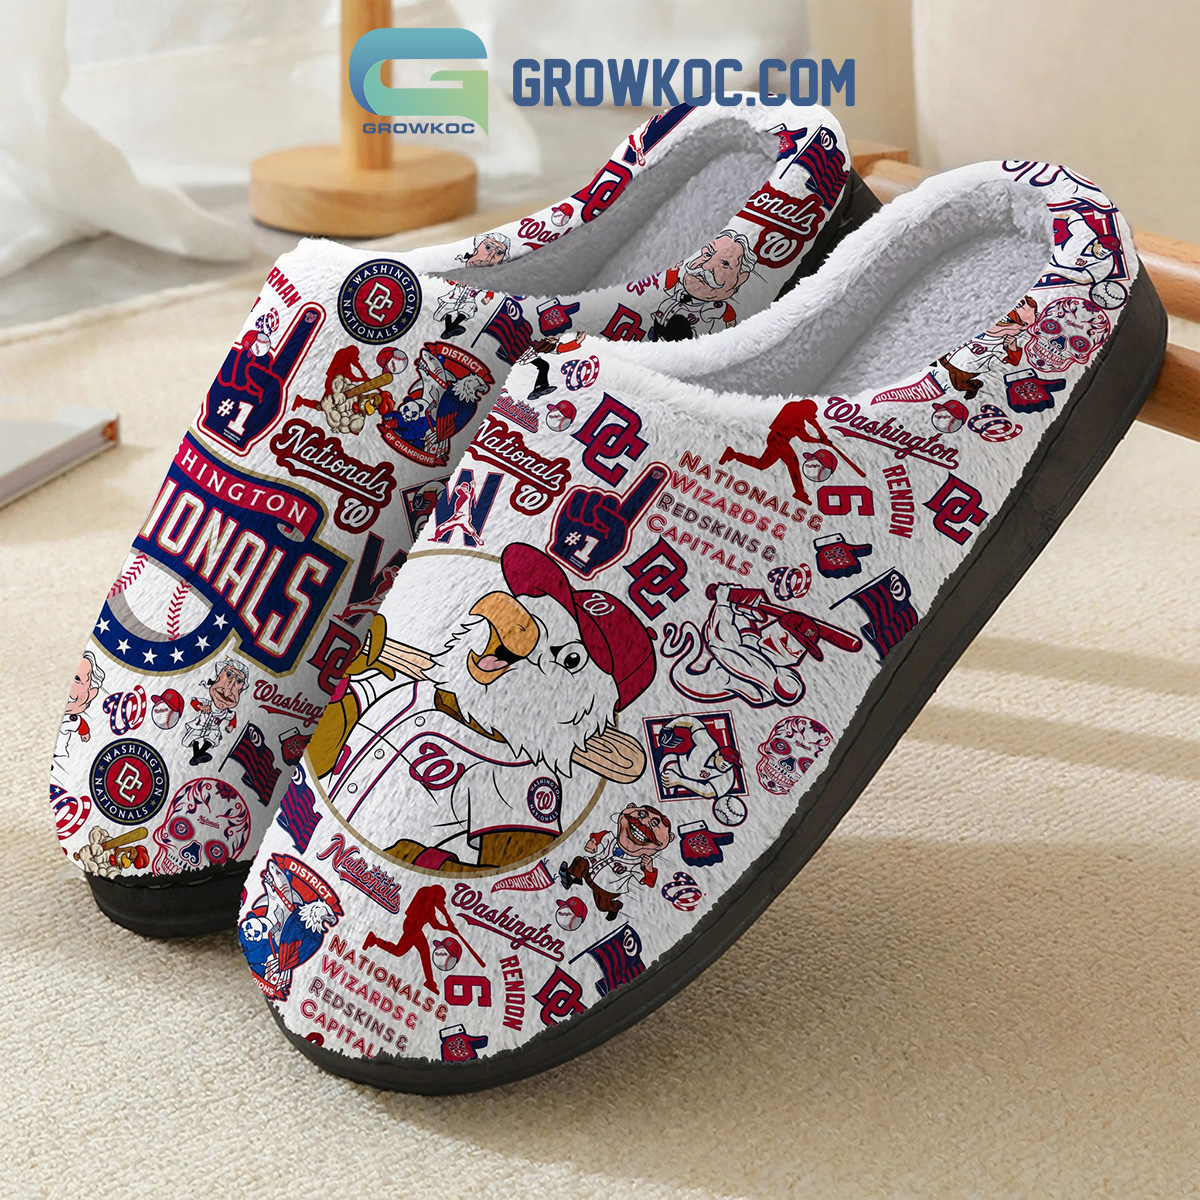 Washington Nationals Wizards Redskins And Capitals House Slippers